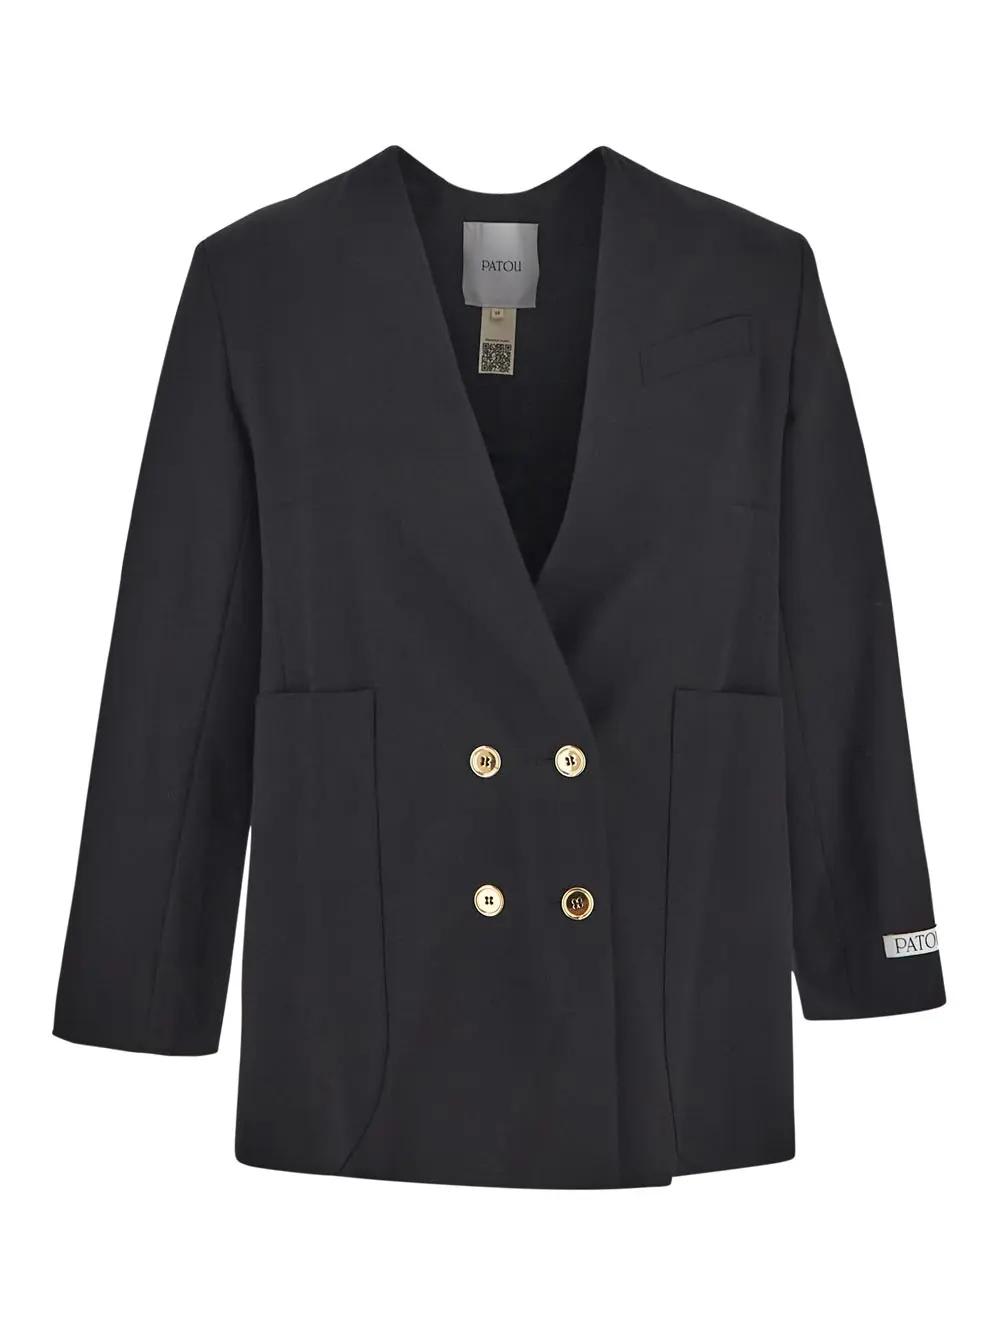 PATOU NO COLLAR DOUBLE BREASTED JACKET